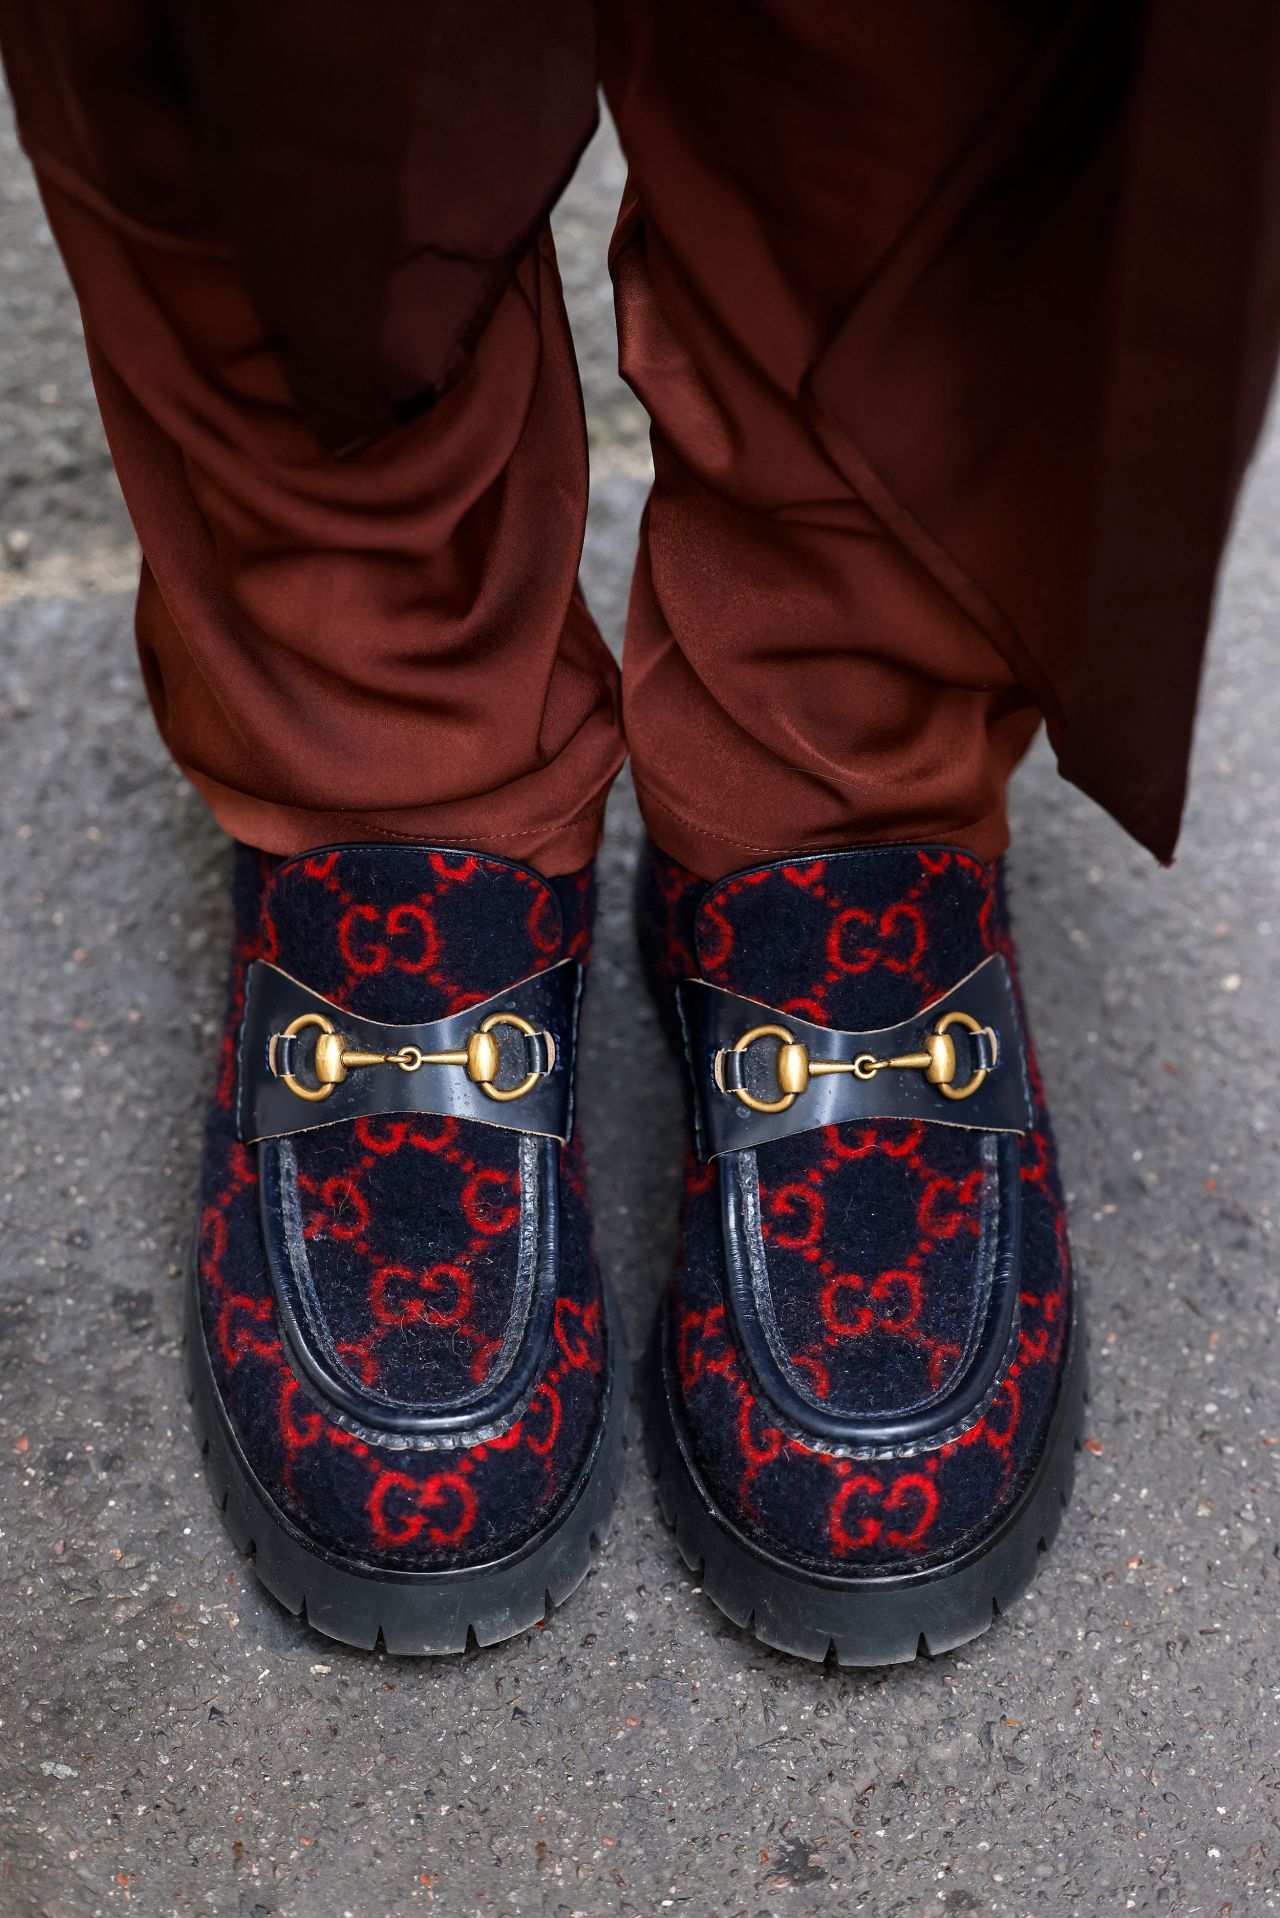 Gucci's horsebit is a coveted status symbol 70 on CNN